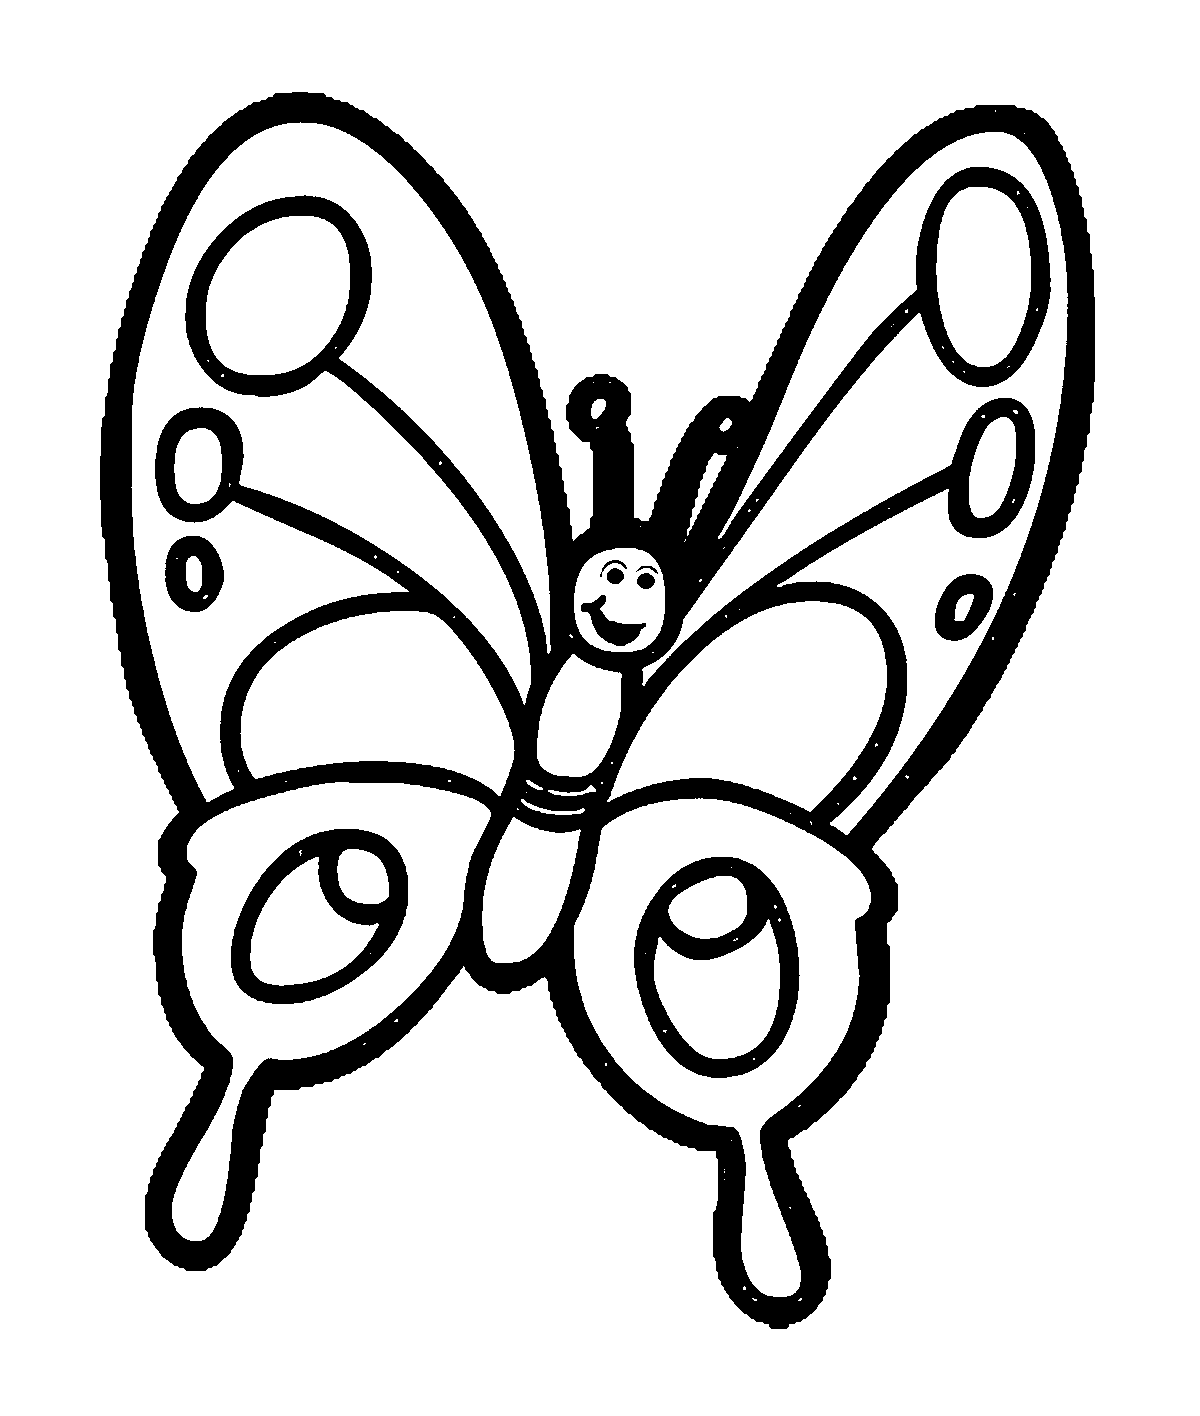 Butterfly black and white cartoonbutterfly coloring page format